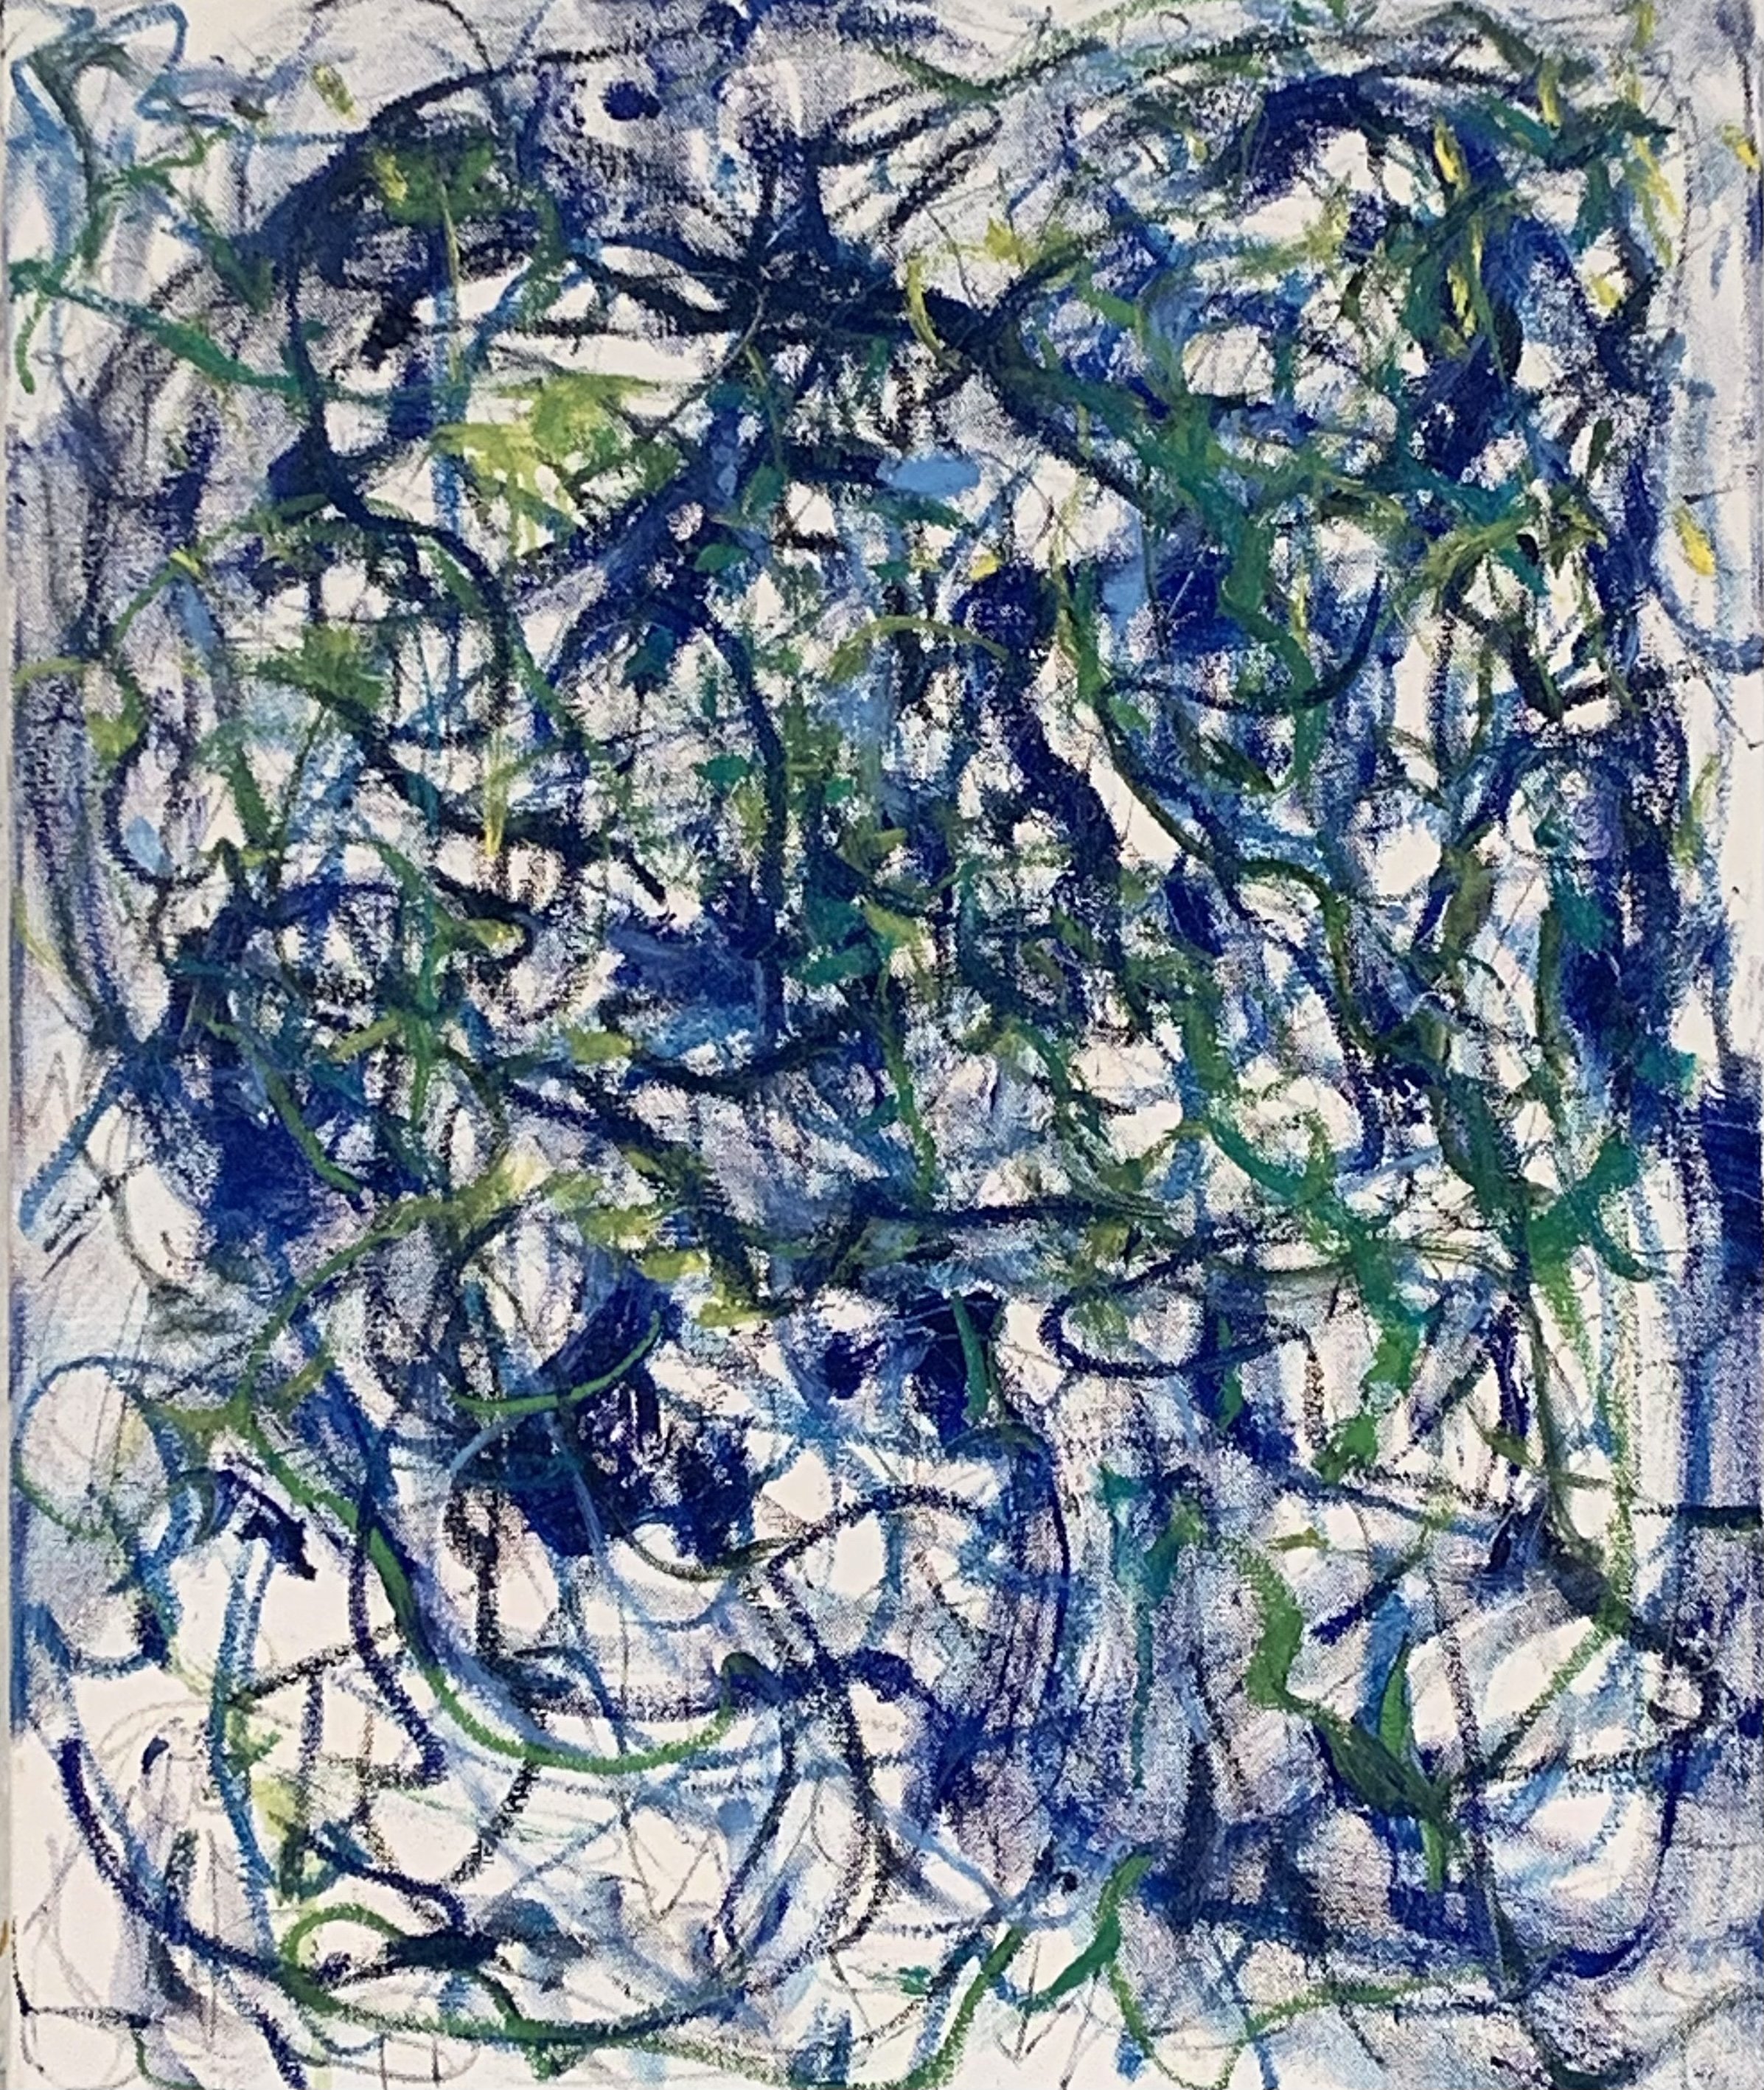 “Opening No. 169” oil stick and oil on canvas, 24”x20”